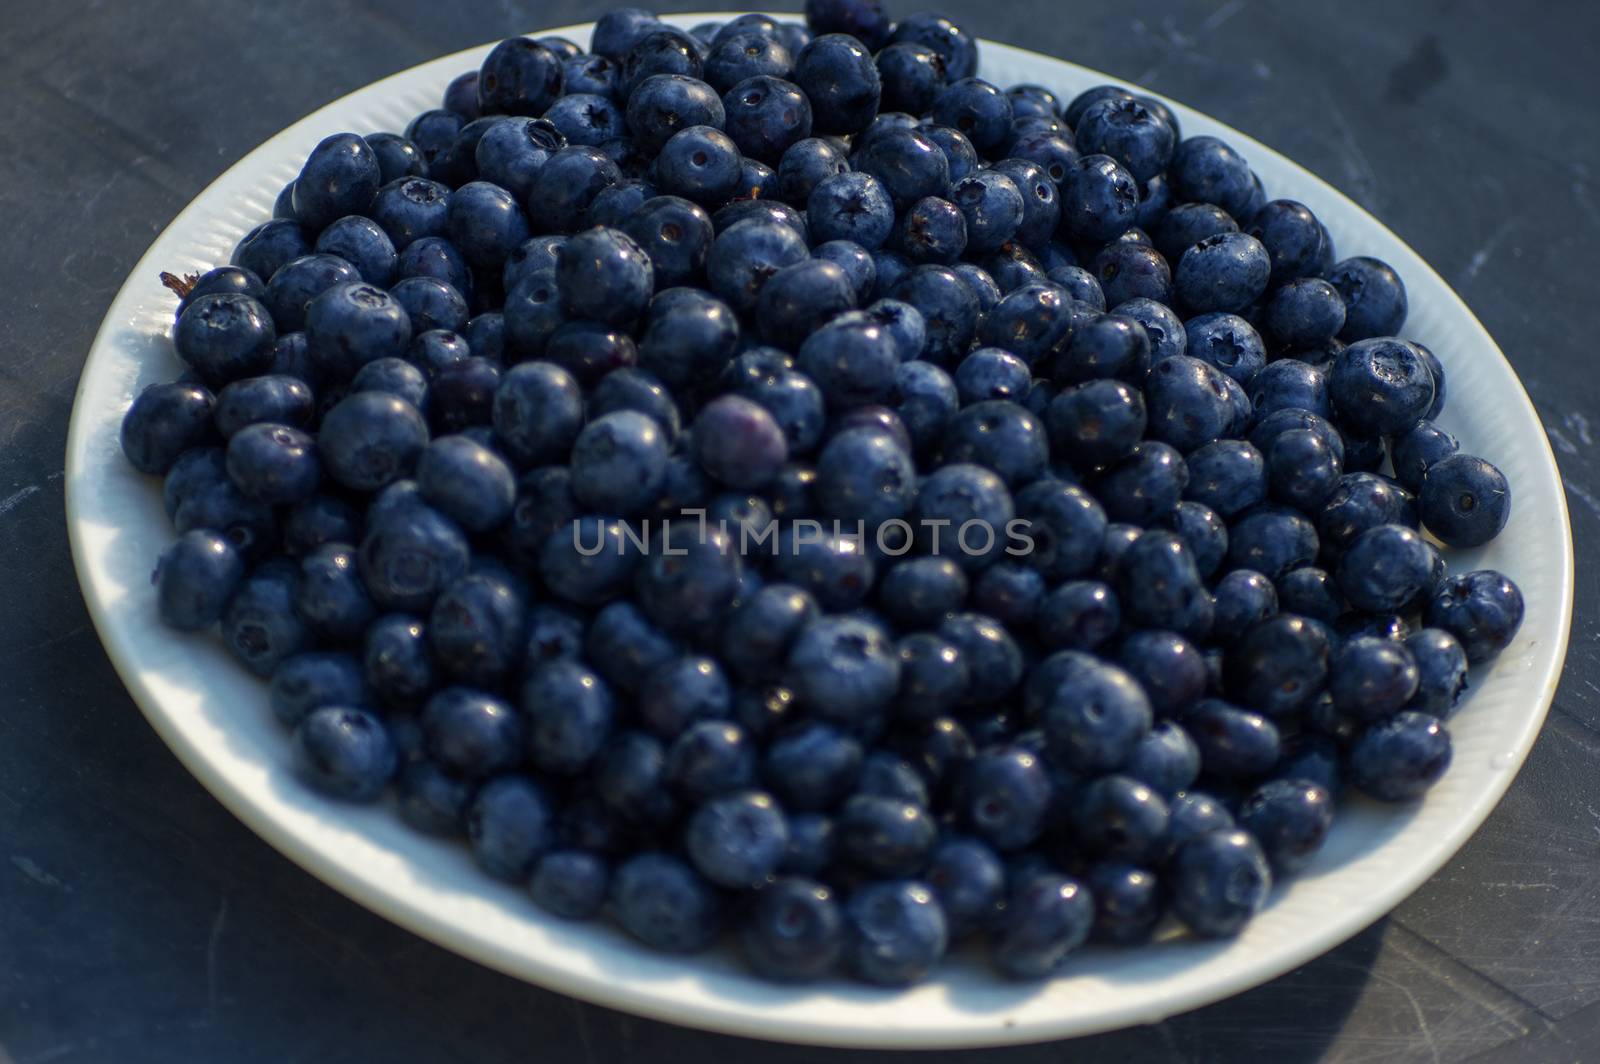 Blueberries by Mads_Hjorth_Jakobsen